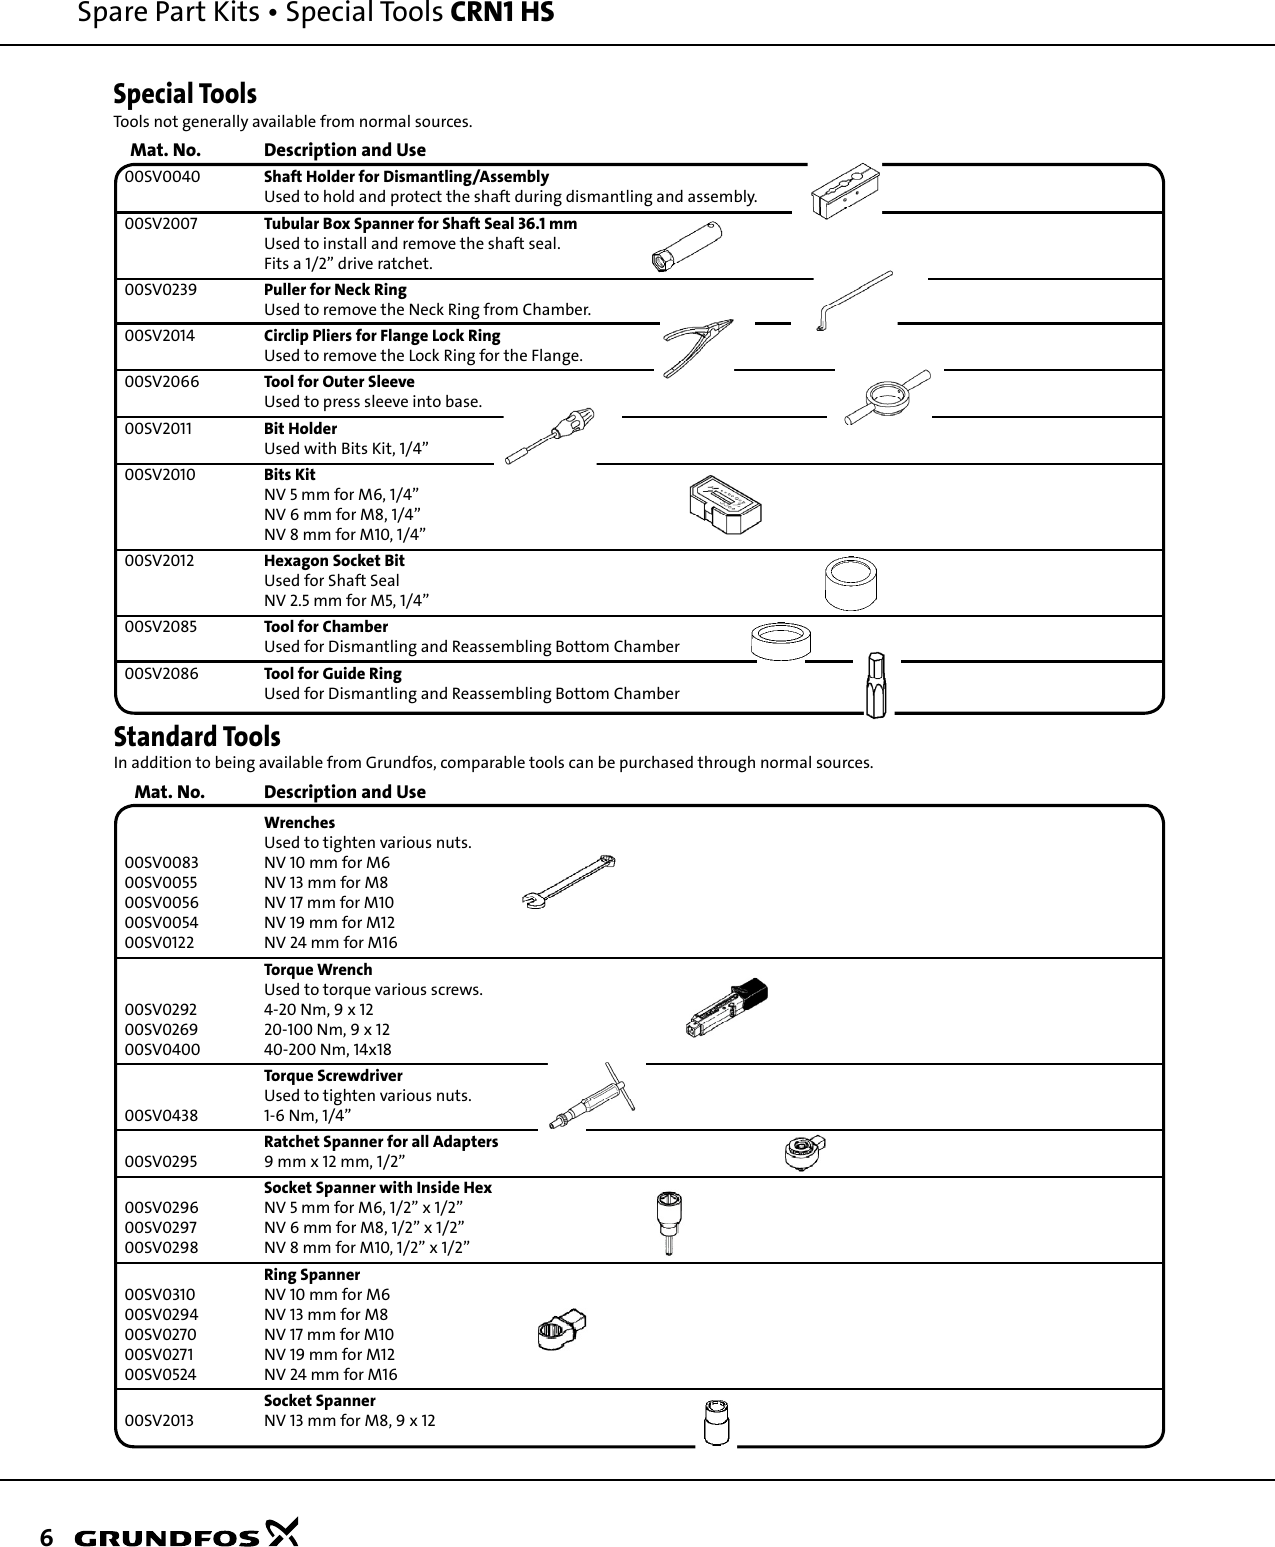 Page 6 of 8 - 548293 3 Grundfos CRN1-HS Series Replacement Parts List